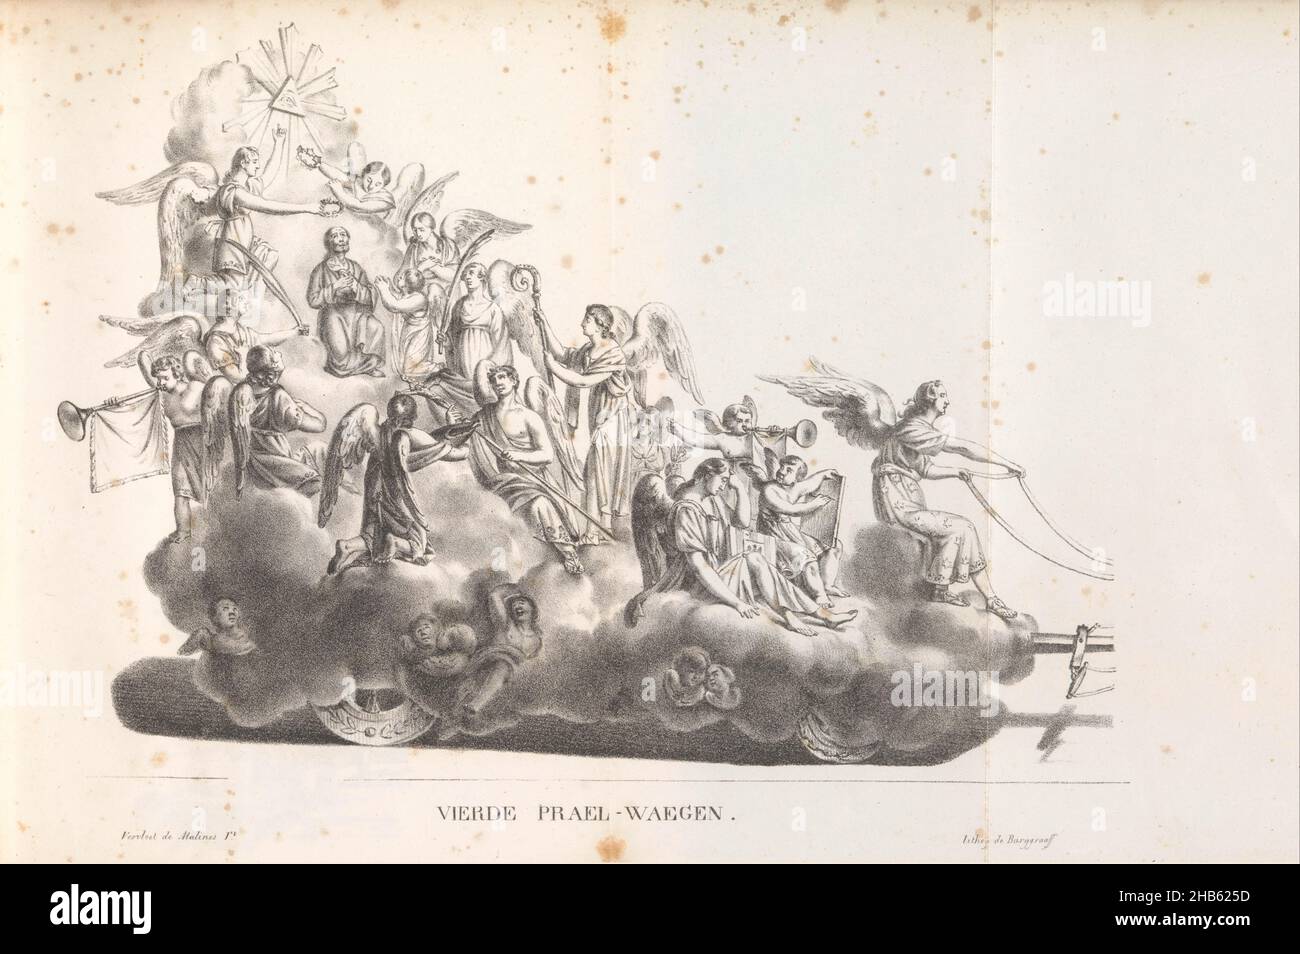 Fourth float in the procession for Saint Rombout, 1825, Fourth Prael-waegen (title on object), The fourth float in the procession for Saint Rombout. On the float the blessing of Rombout amidst angels. The procession was held on 28 June, 5 and 12 July 1825. Illustration in a publication on the occasion of the 50th anniversary in 1825 of the jubilee of Saint Rumoldus or Rombout, patron saint of the city of Mechelen., print maker: Frans Vervloet (mentioned on object), printer: Burggraaff (mentioned on object), print maker: Mechelen, printer: Brussels, publisher: Mechelen, 1825, paper, height 210 Stock Photo